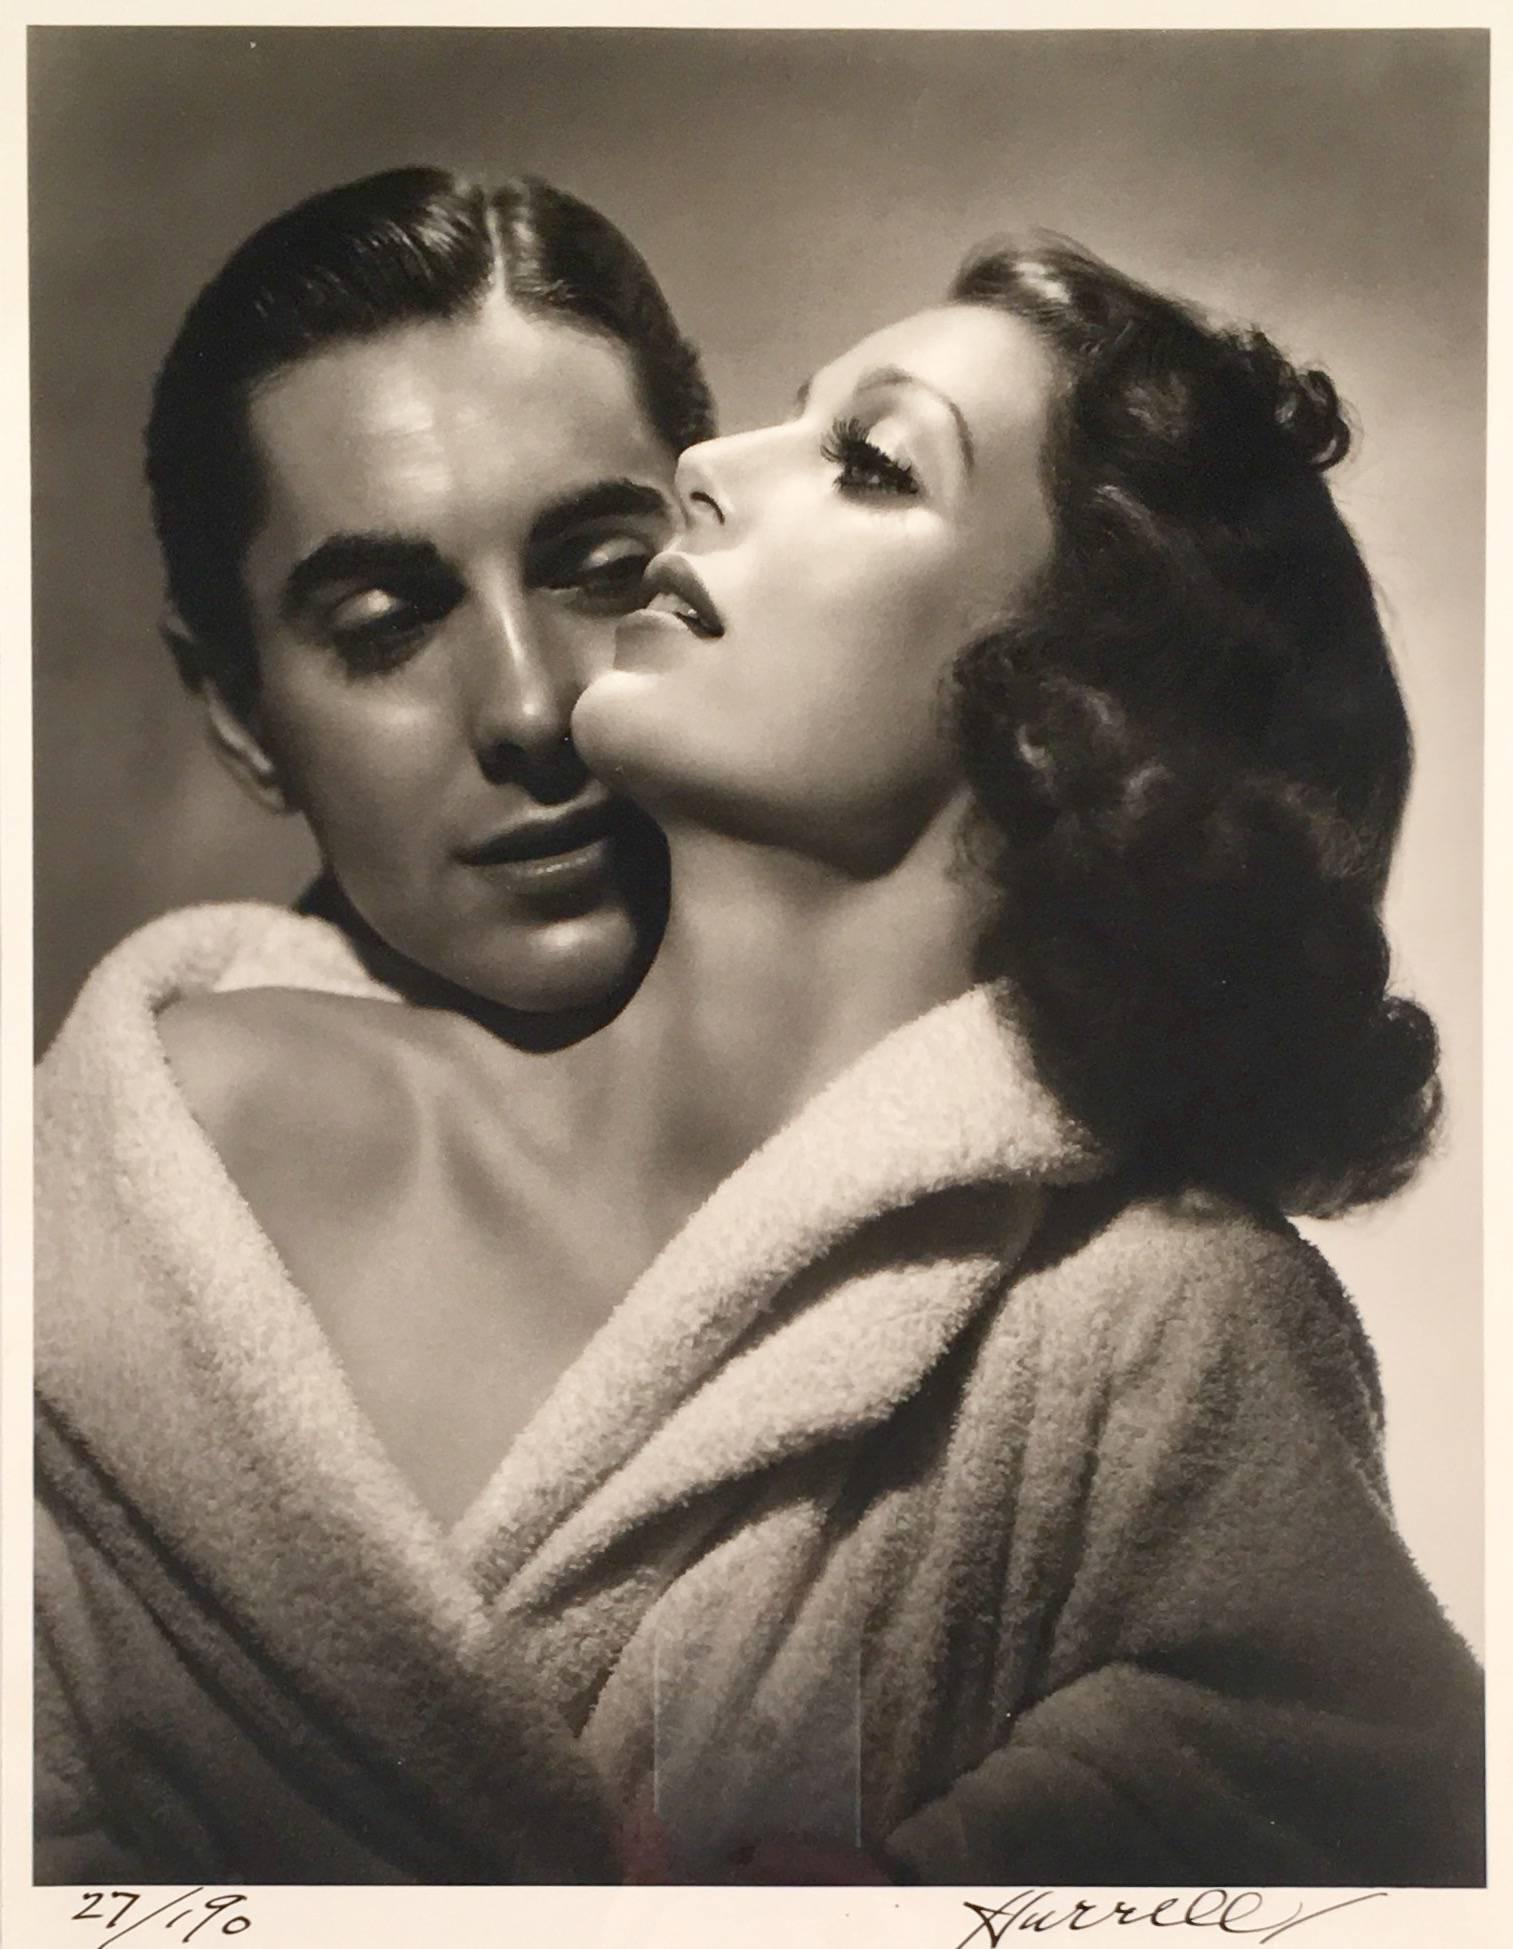 This piece is an original black and white photograph printed from the original negative by George Hurrell, shot in 1937 and printed at a later date. This image depicts "Old Hollywood" actor and actress, Tyrone Power and Loretta Young, in promotion